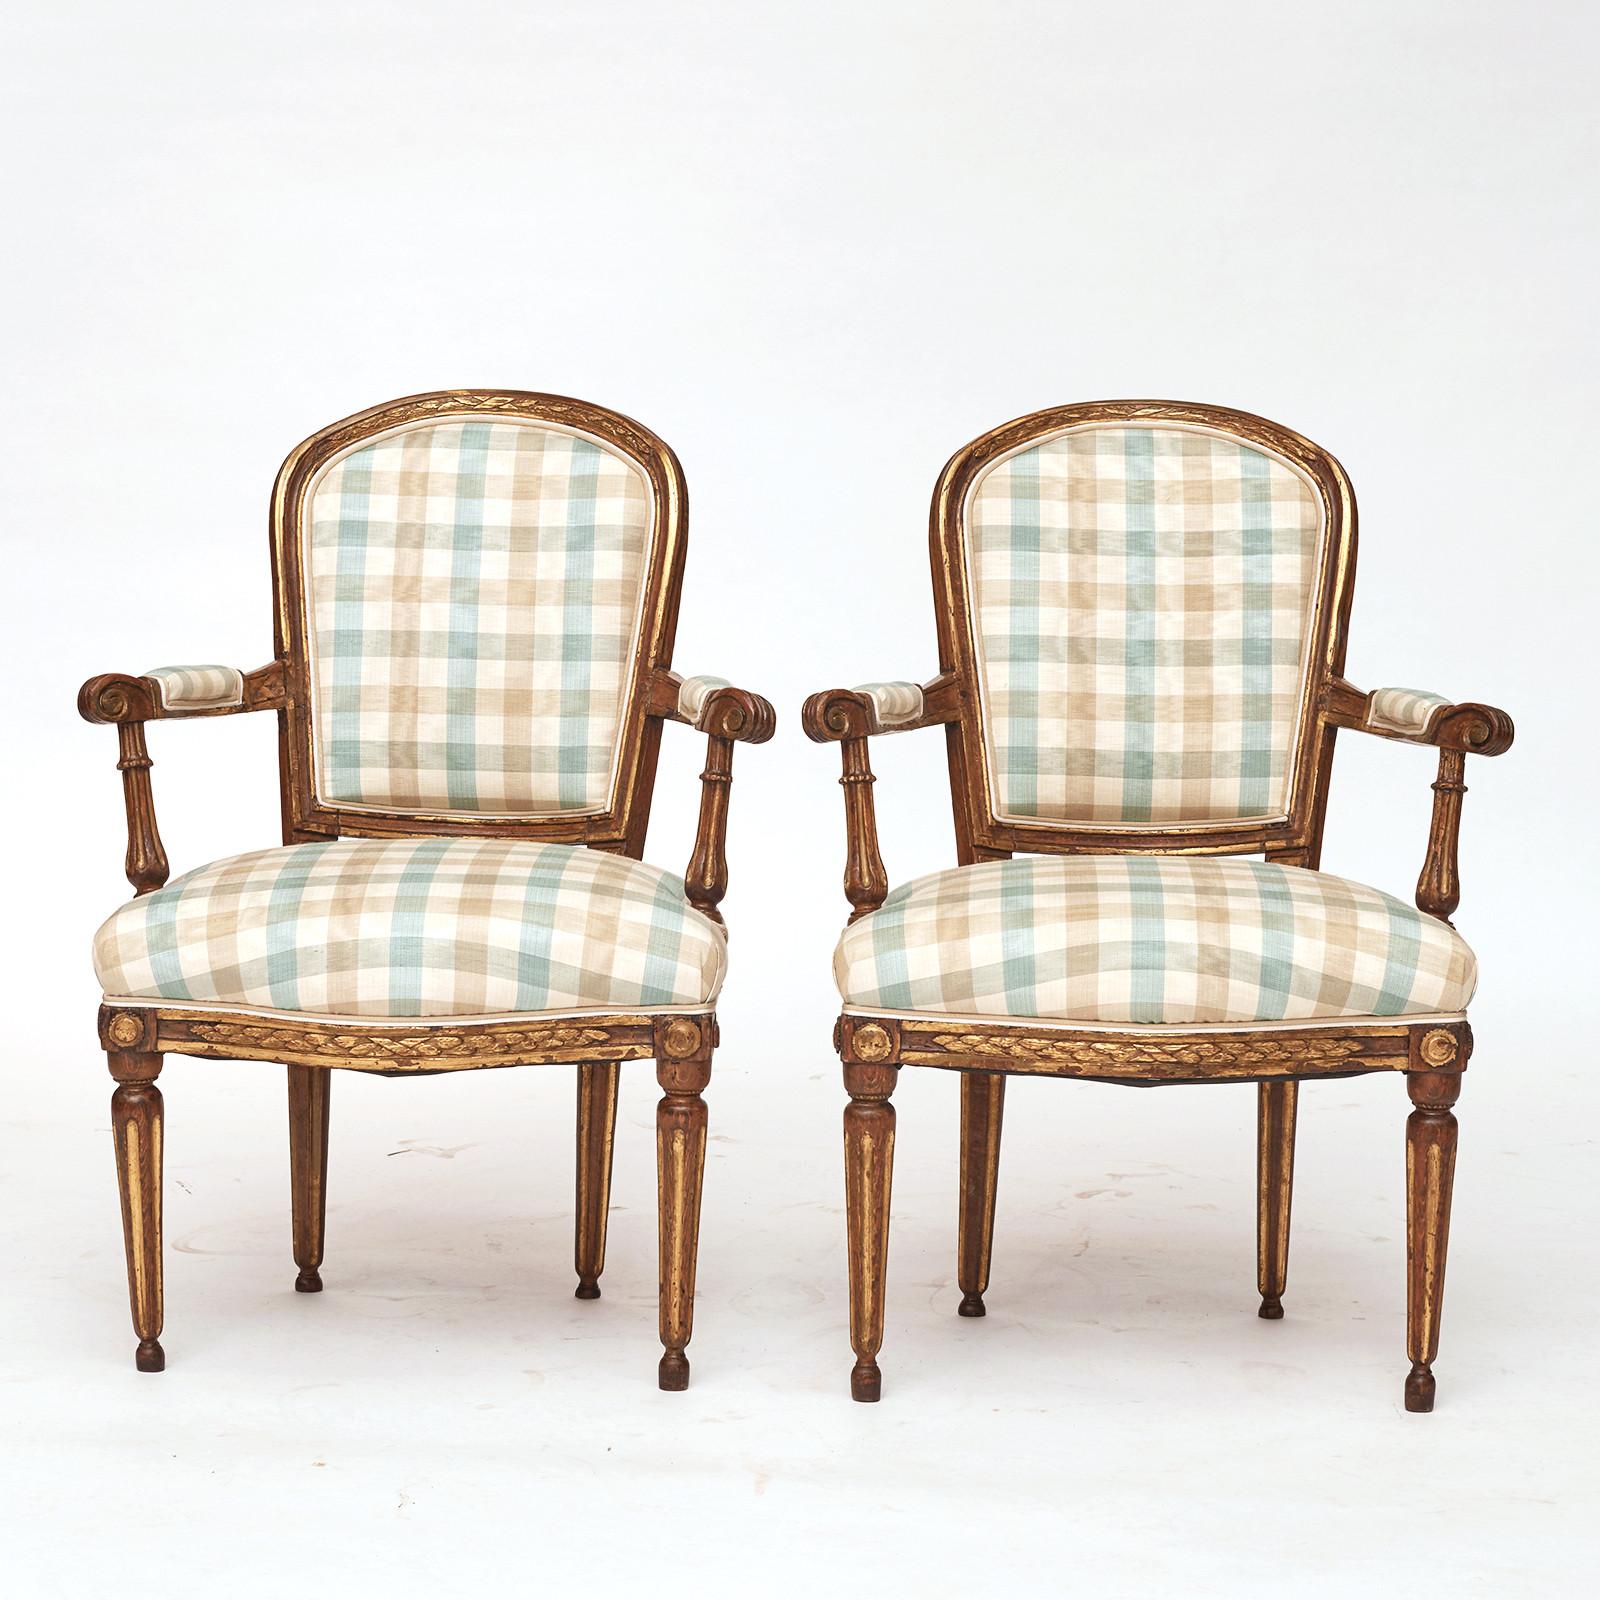 A pair of Danish Louis XVI giltwood open armchairs, late 18th century, with a arched upholstered backrest, straight armrests, upholstered seat raised on turned fluted and tapered legs. 
Wonderful giltwood patina. 
New upholstery with Fabric 'Moire'